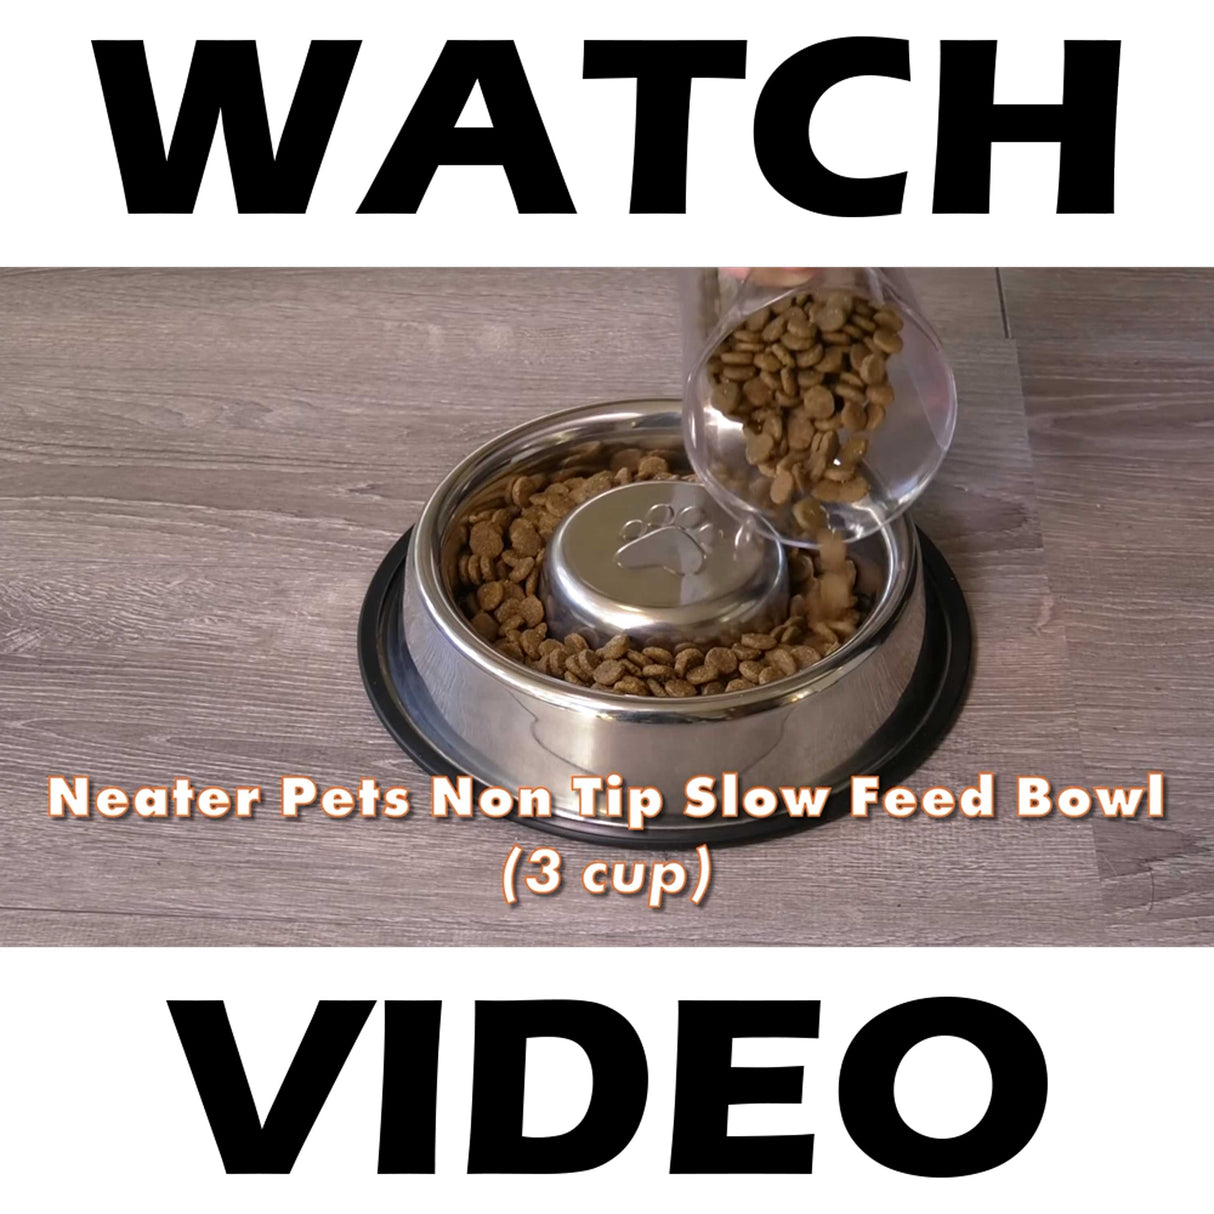 Large Non-Tip Slow Feed Bowl video